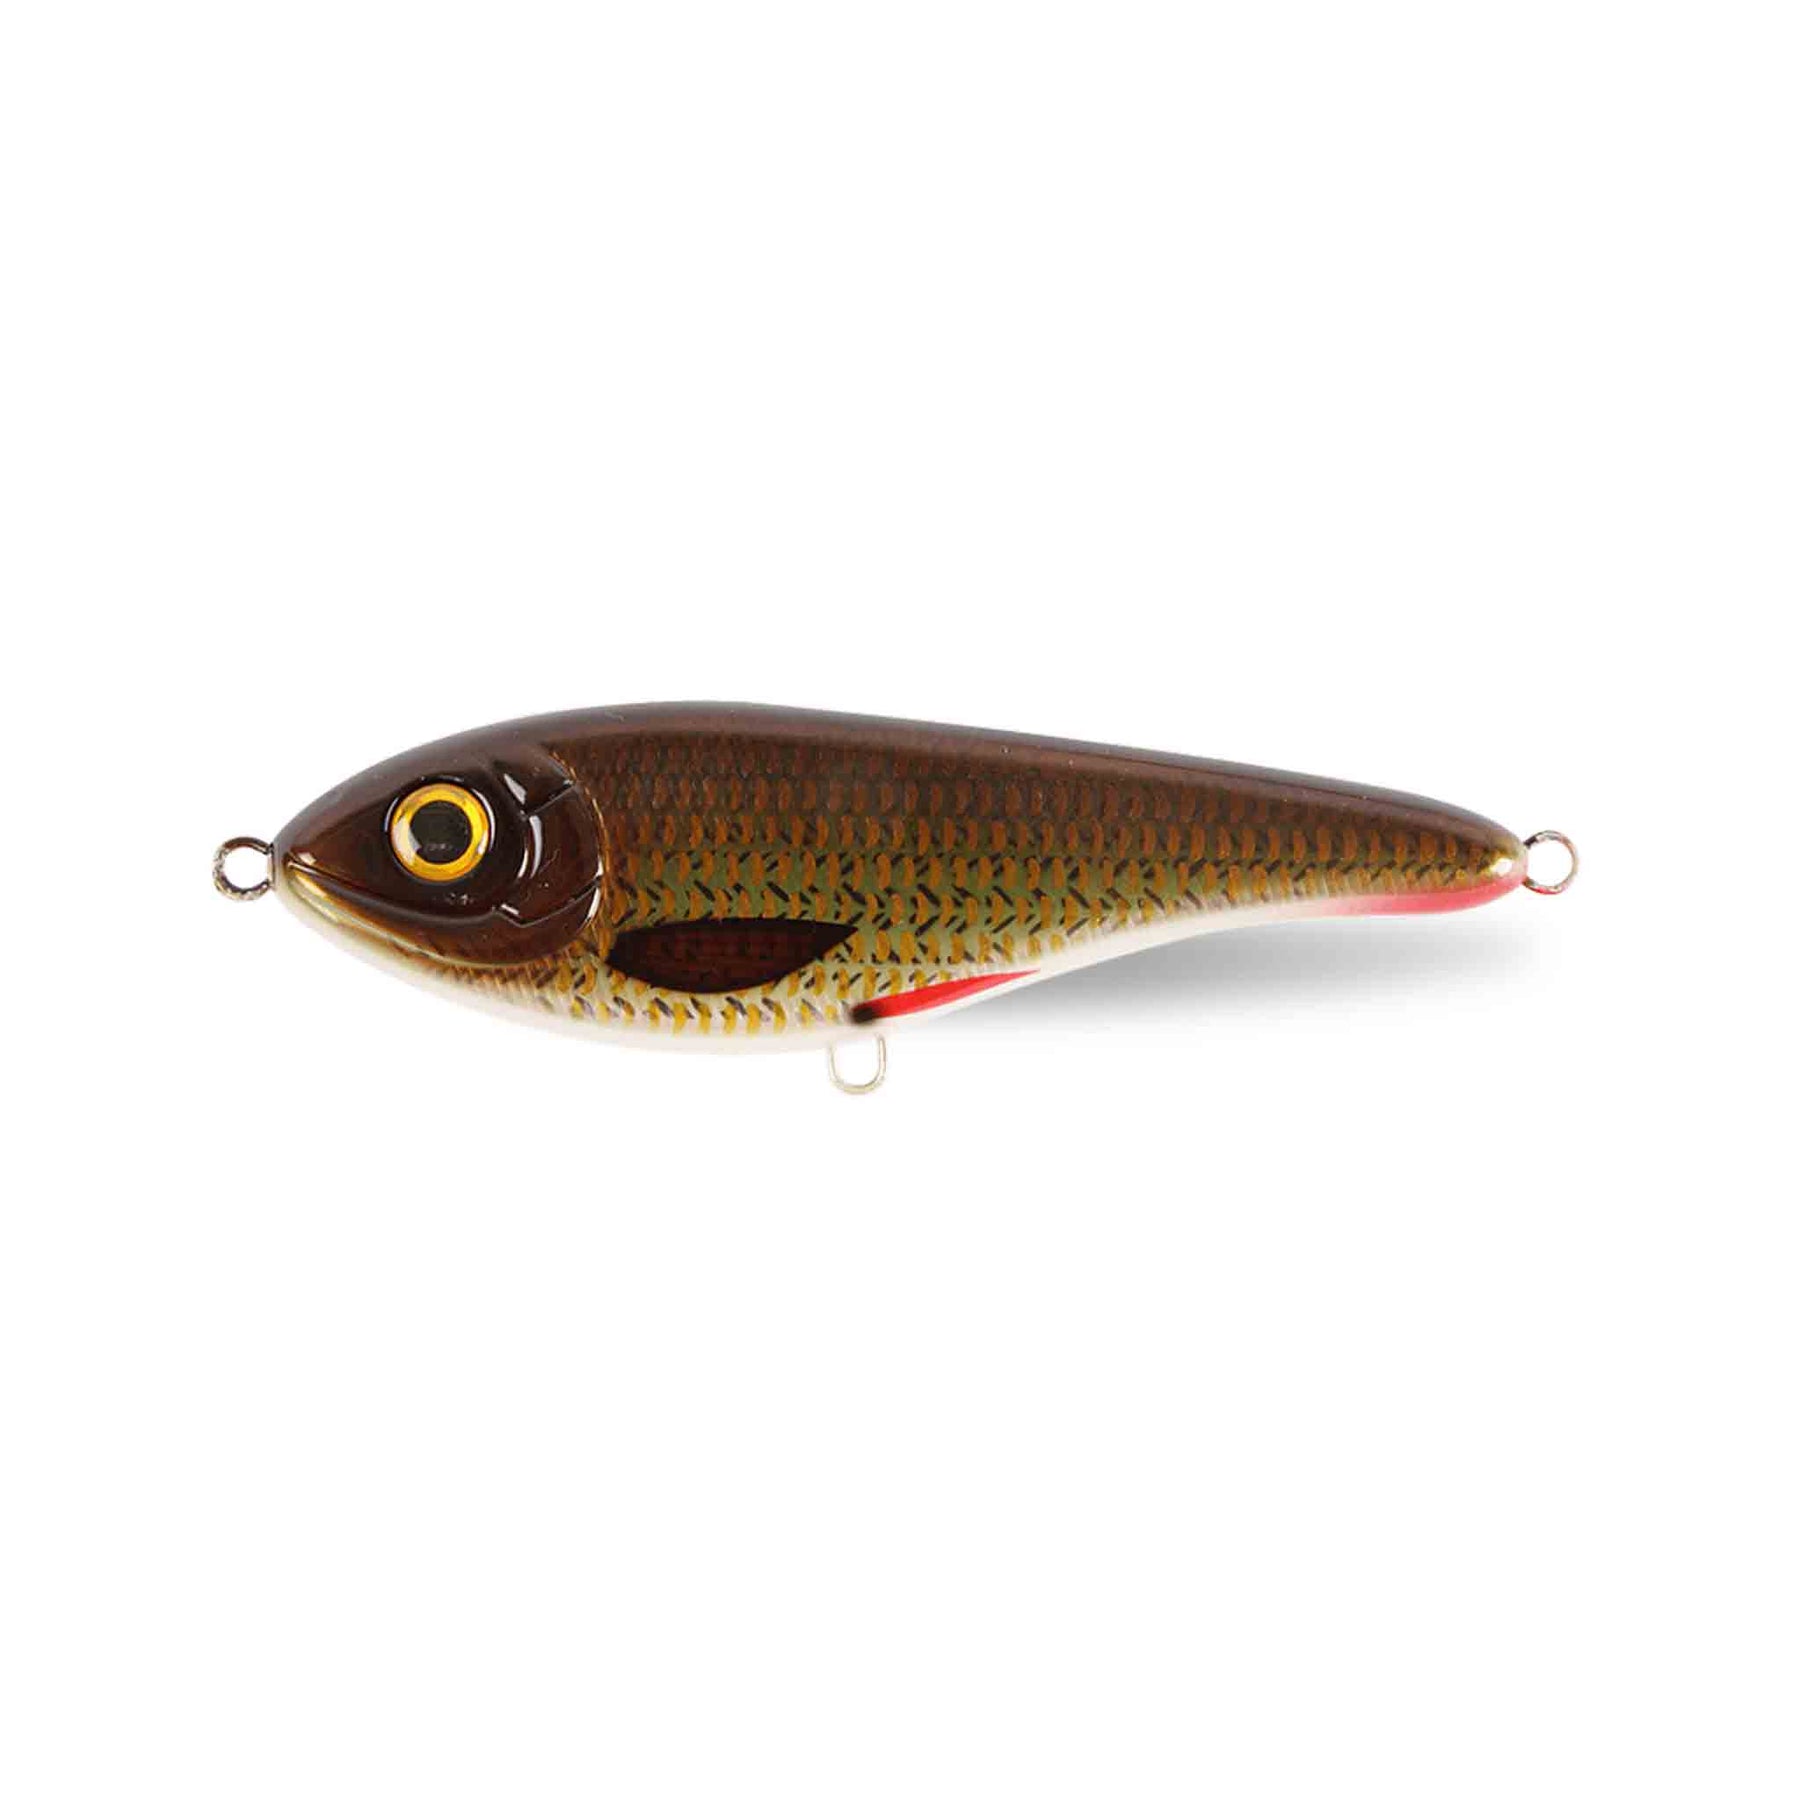 View of Jerk-Glide_Baits Strike Pro Buster Jerk Shallow Glide Bait Smolt available at EZOKO Pike and Musky Shop